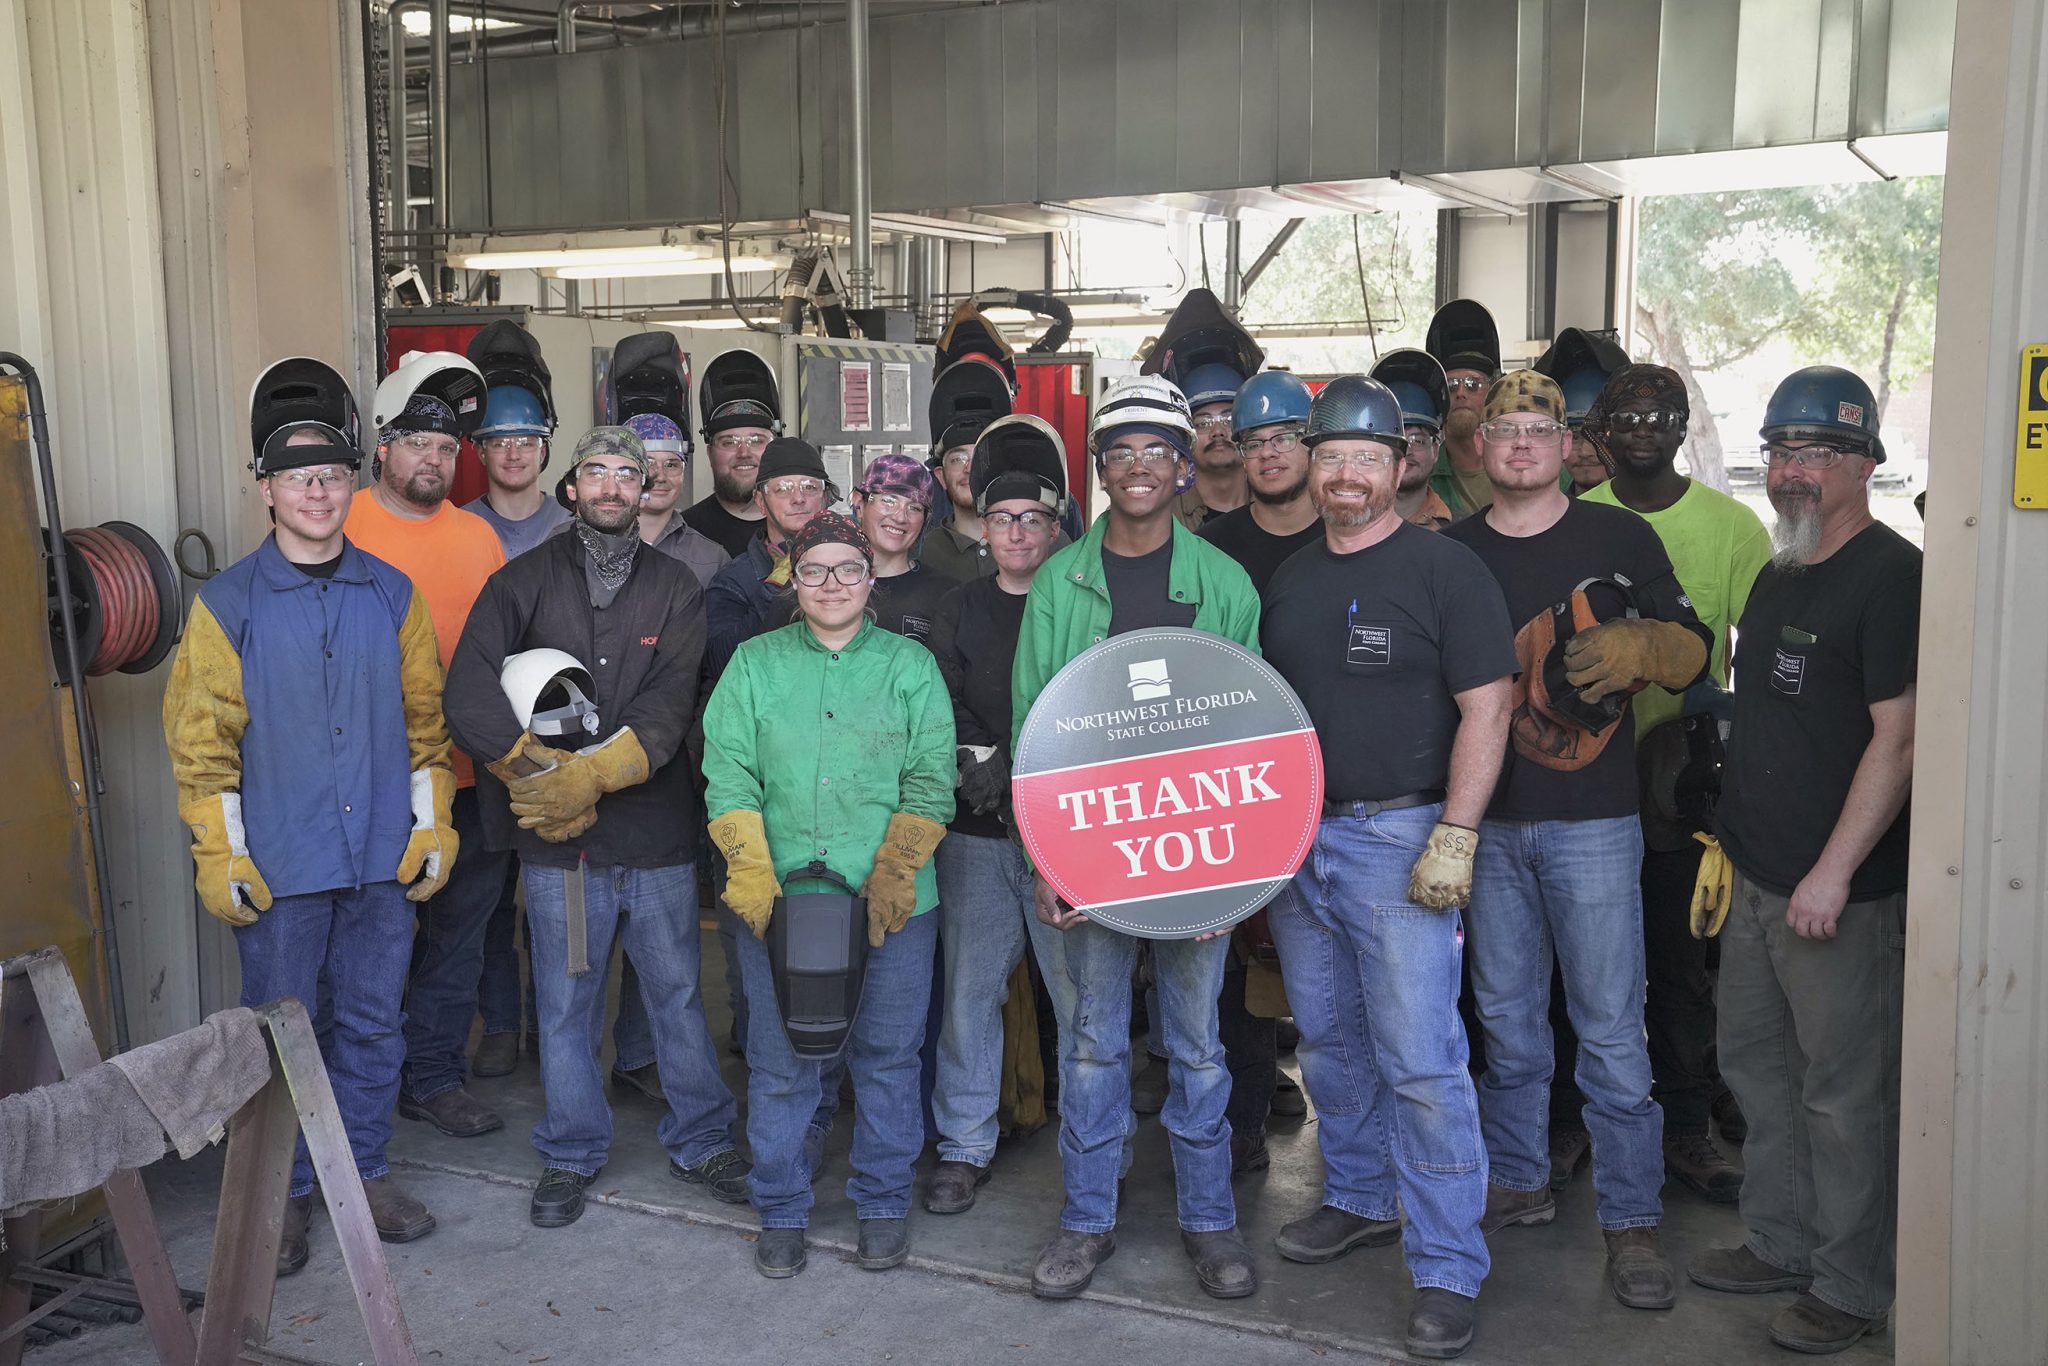 Welding students hold "Thank you" sign